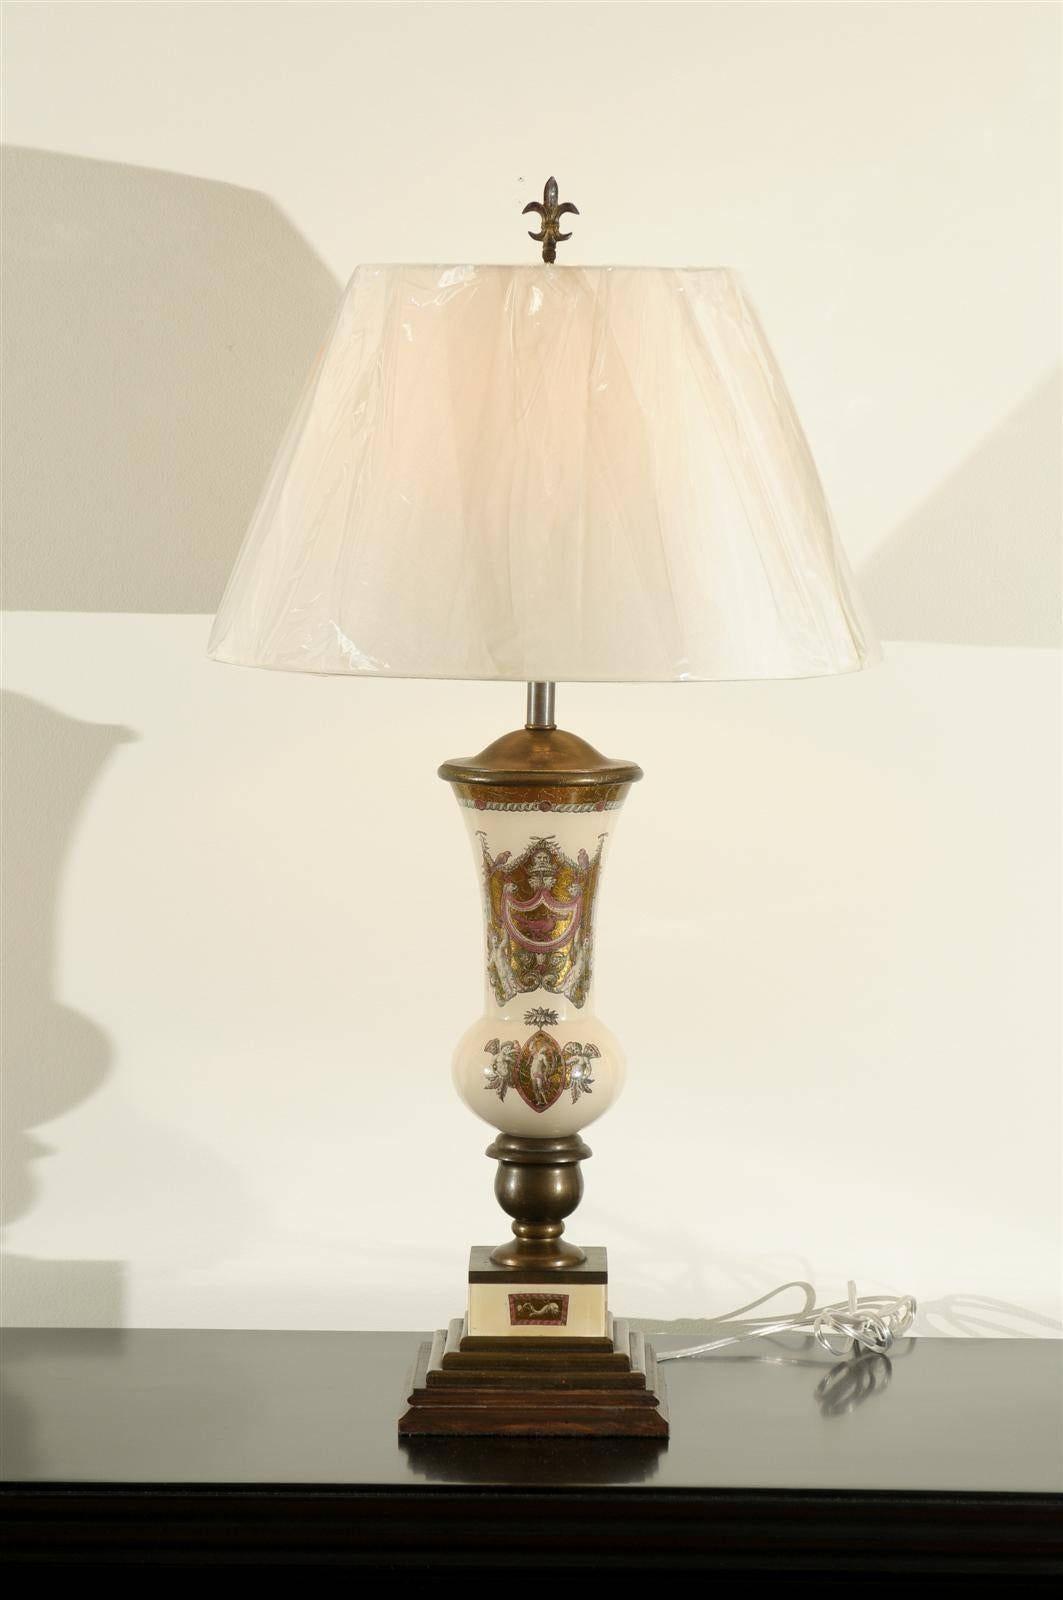 A stunning pair of reverse painted glass lamps. A subtle, whimsical, almost surreal interpretation of the neoclassic style. Cream vessels with motifs executed in charcoal, gold and raspberry. Distressed bronze painted wood base and accents. Each